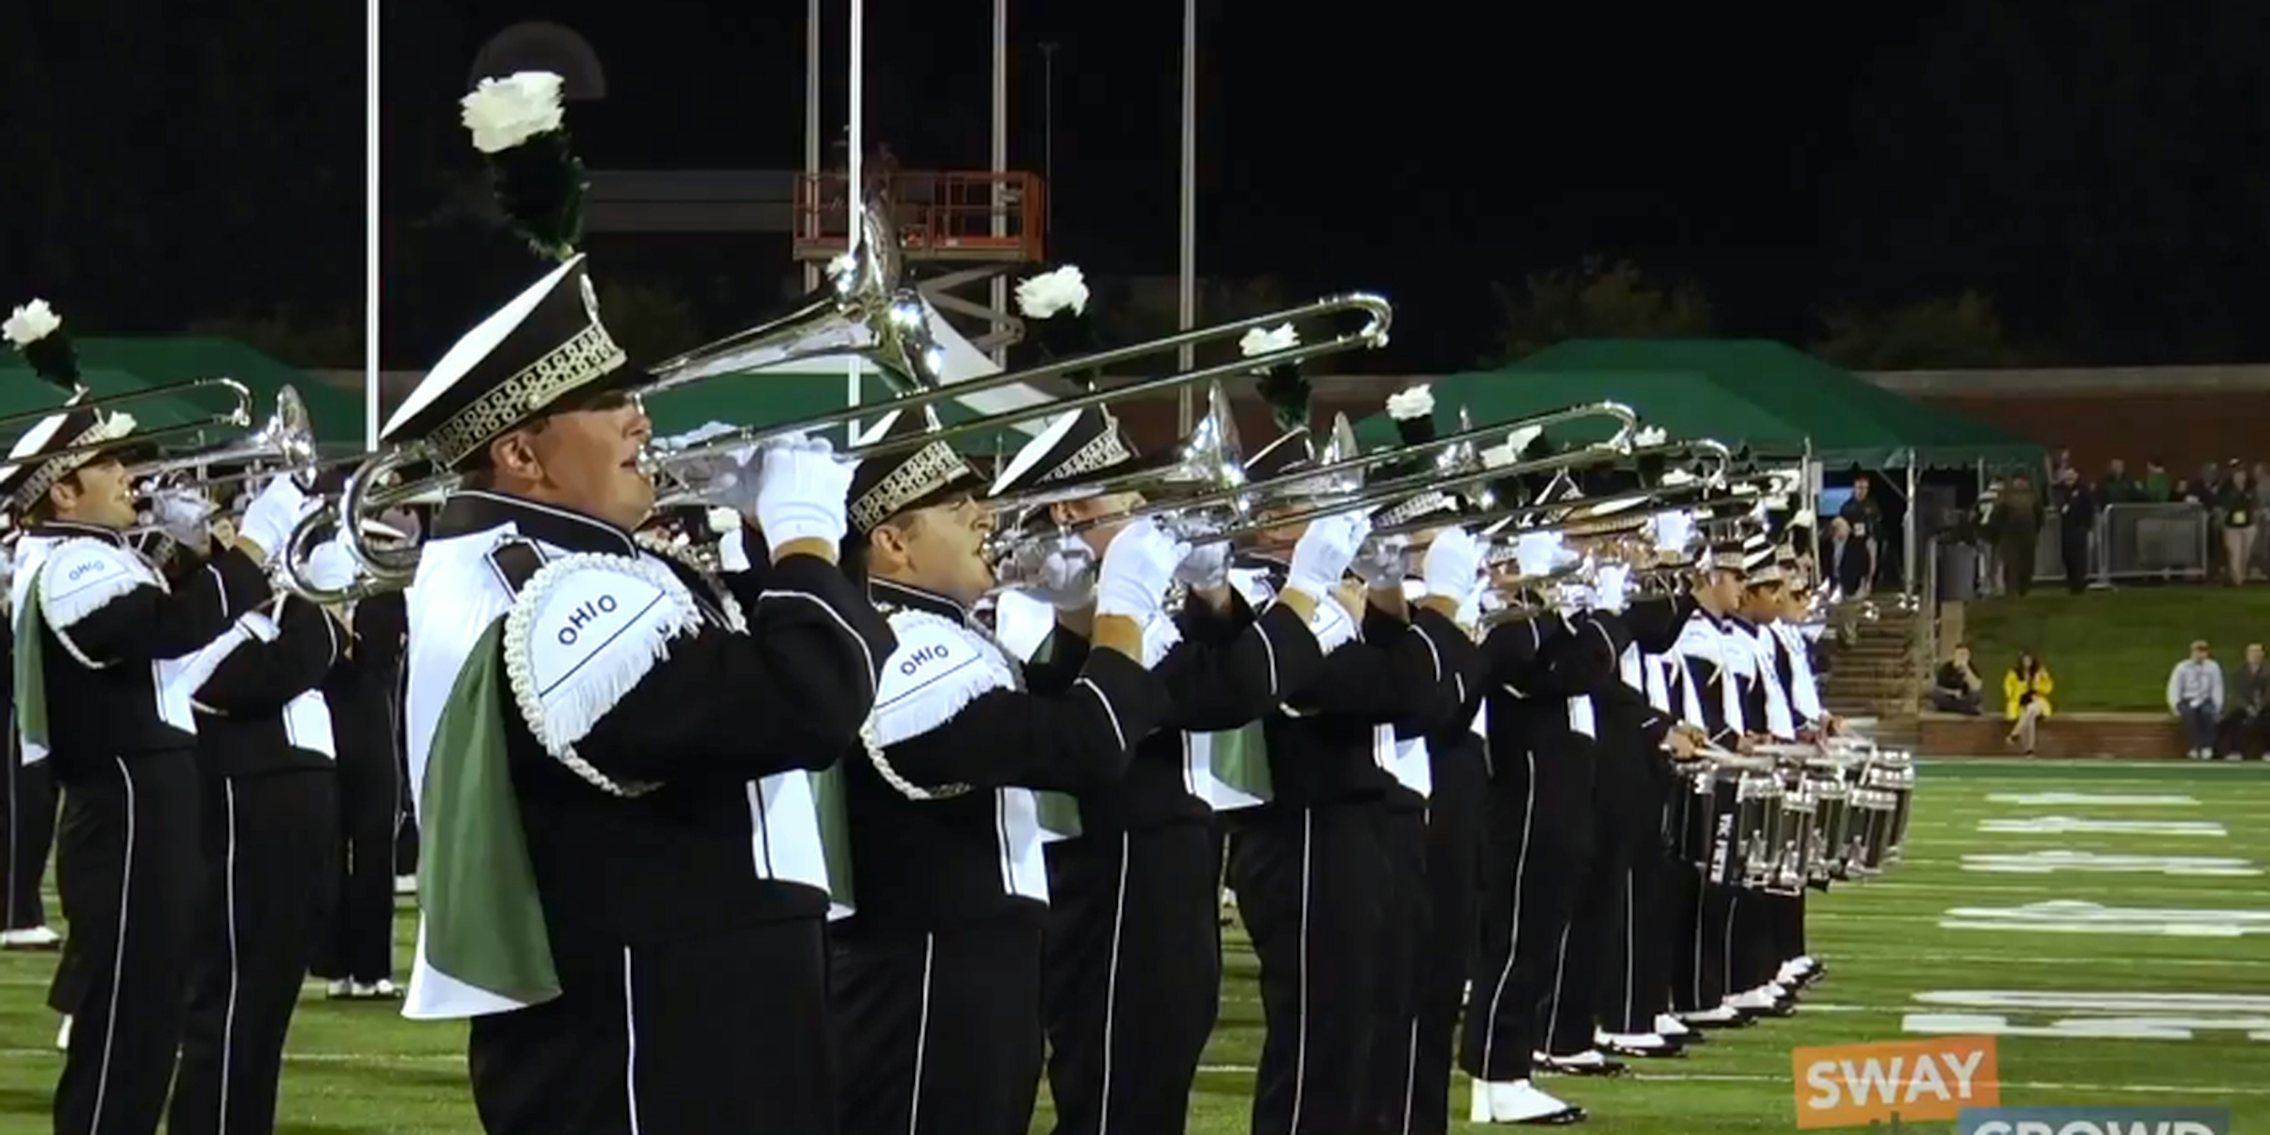 Ohio University marching band covers 'The Fox' during halftime show